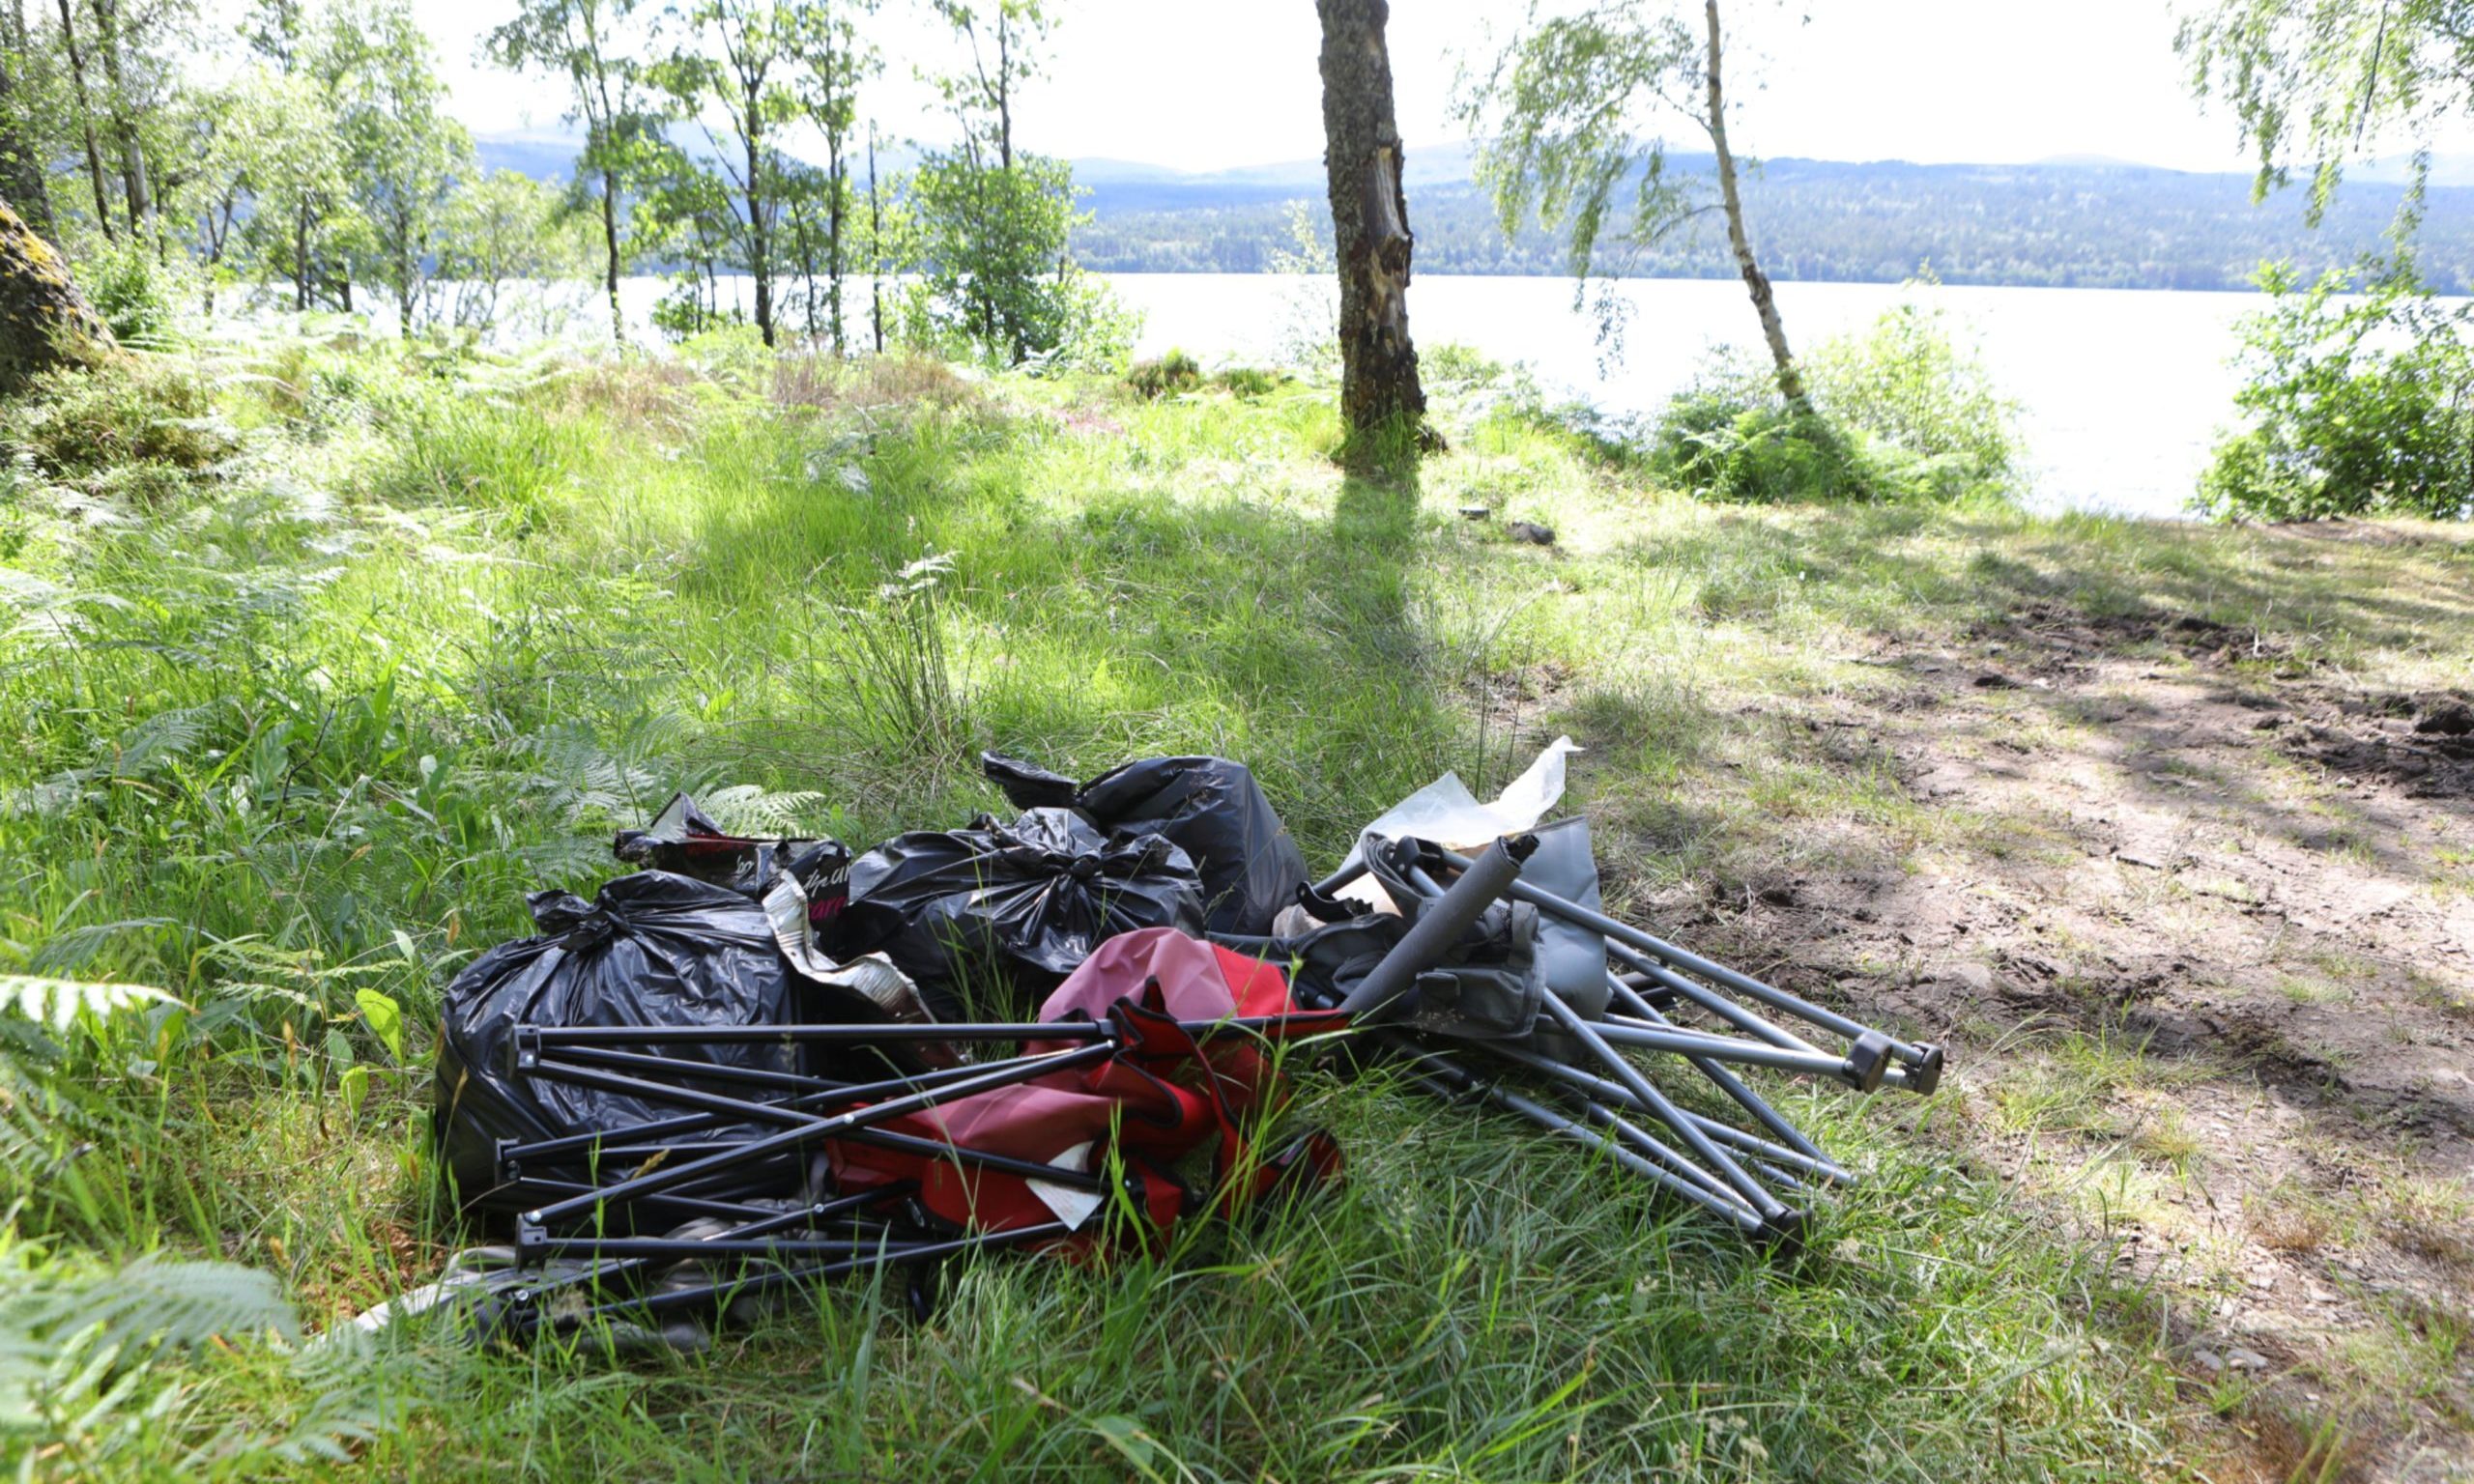 Mess left behind by some of the 'dirty campers' at the side of Loch Rannoch on Sunday morning.